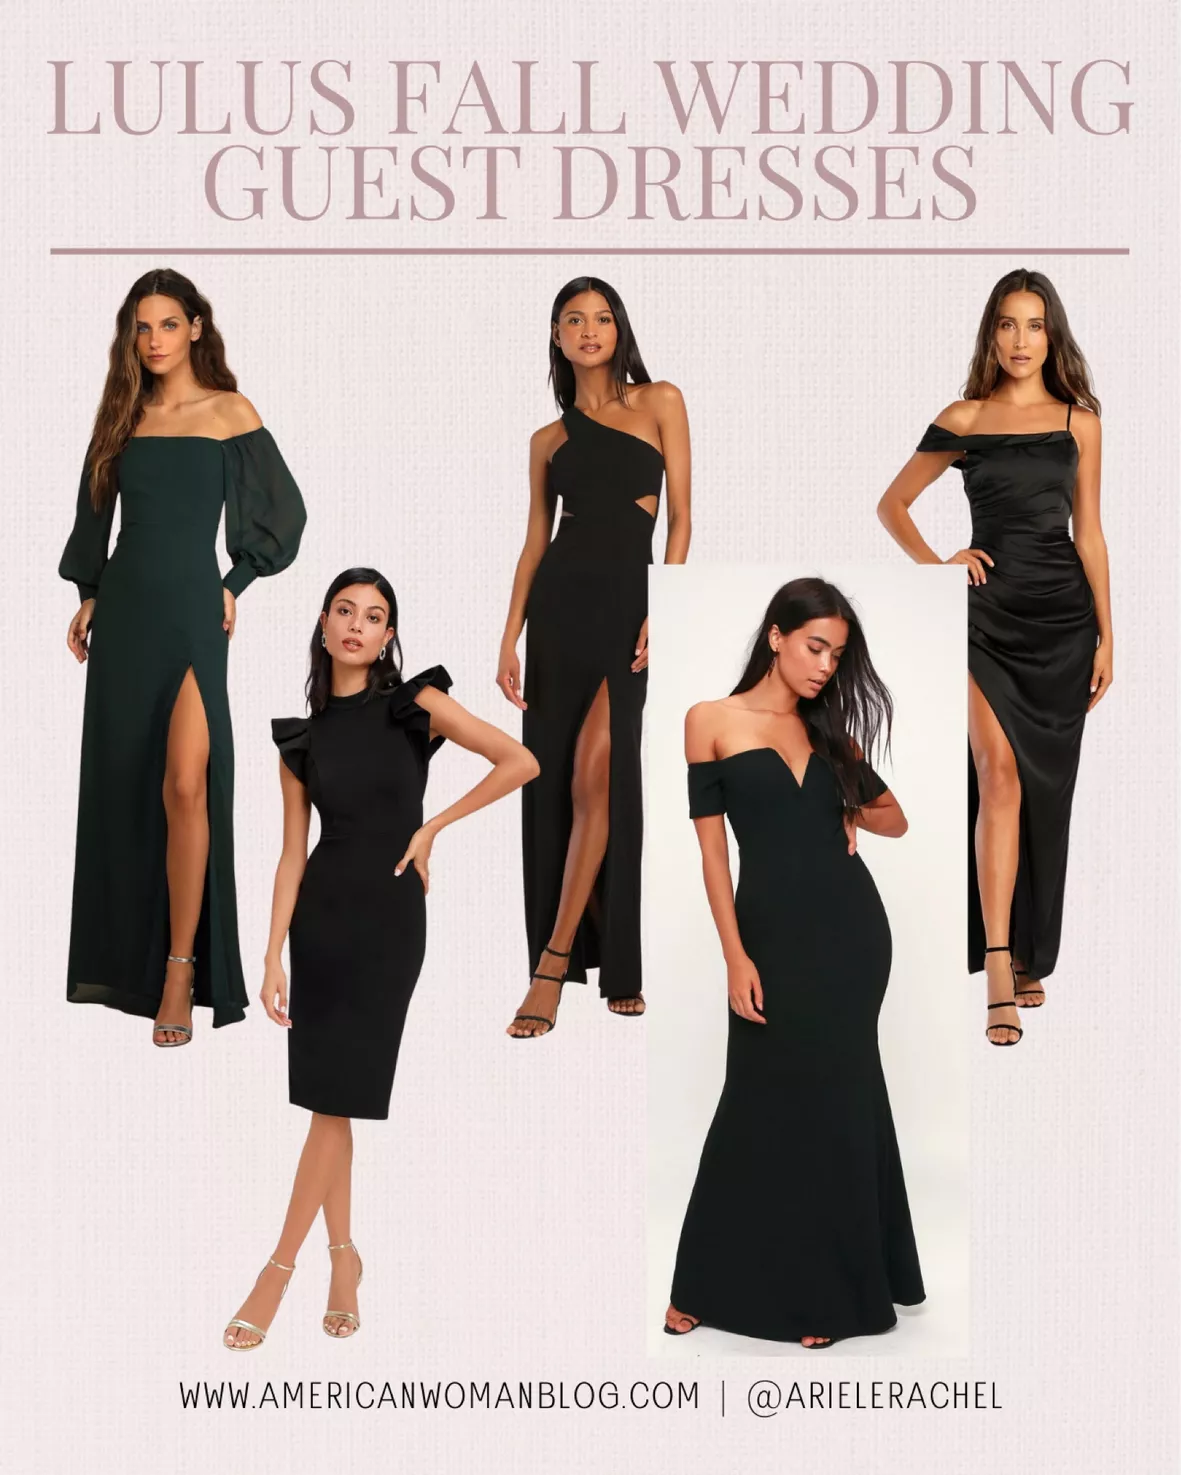 Fall Wedding Guest Dresses - Fall Wedding Outfits - Lulus